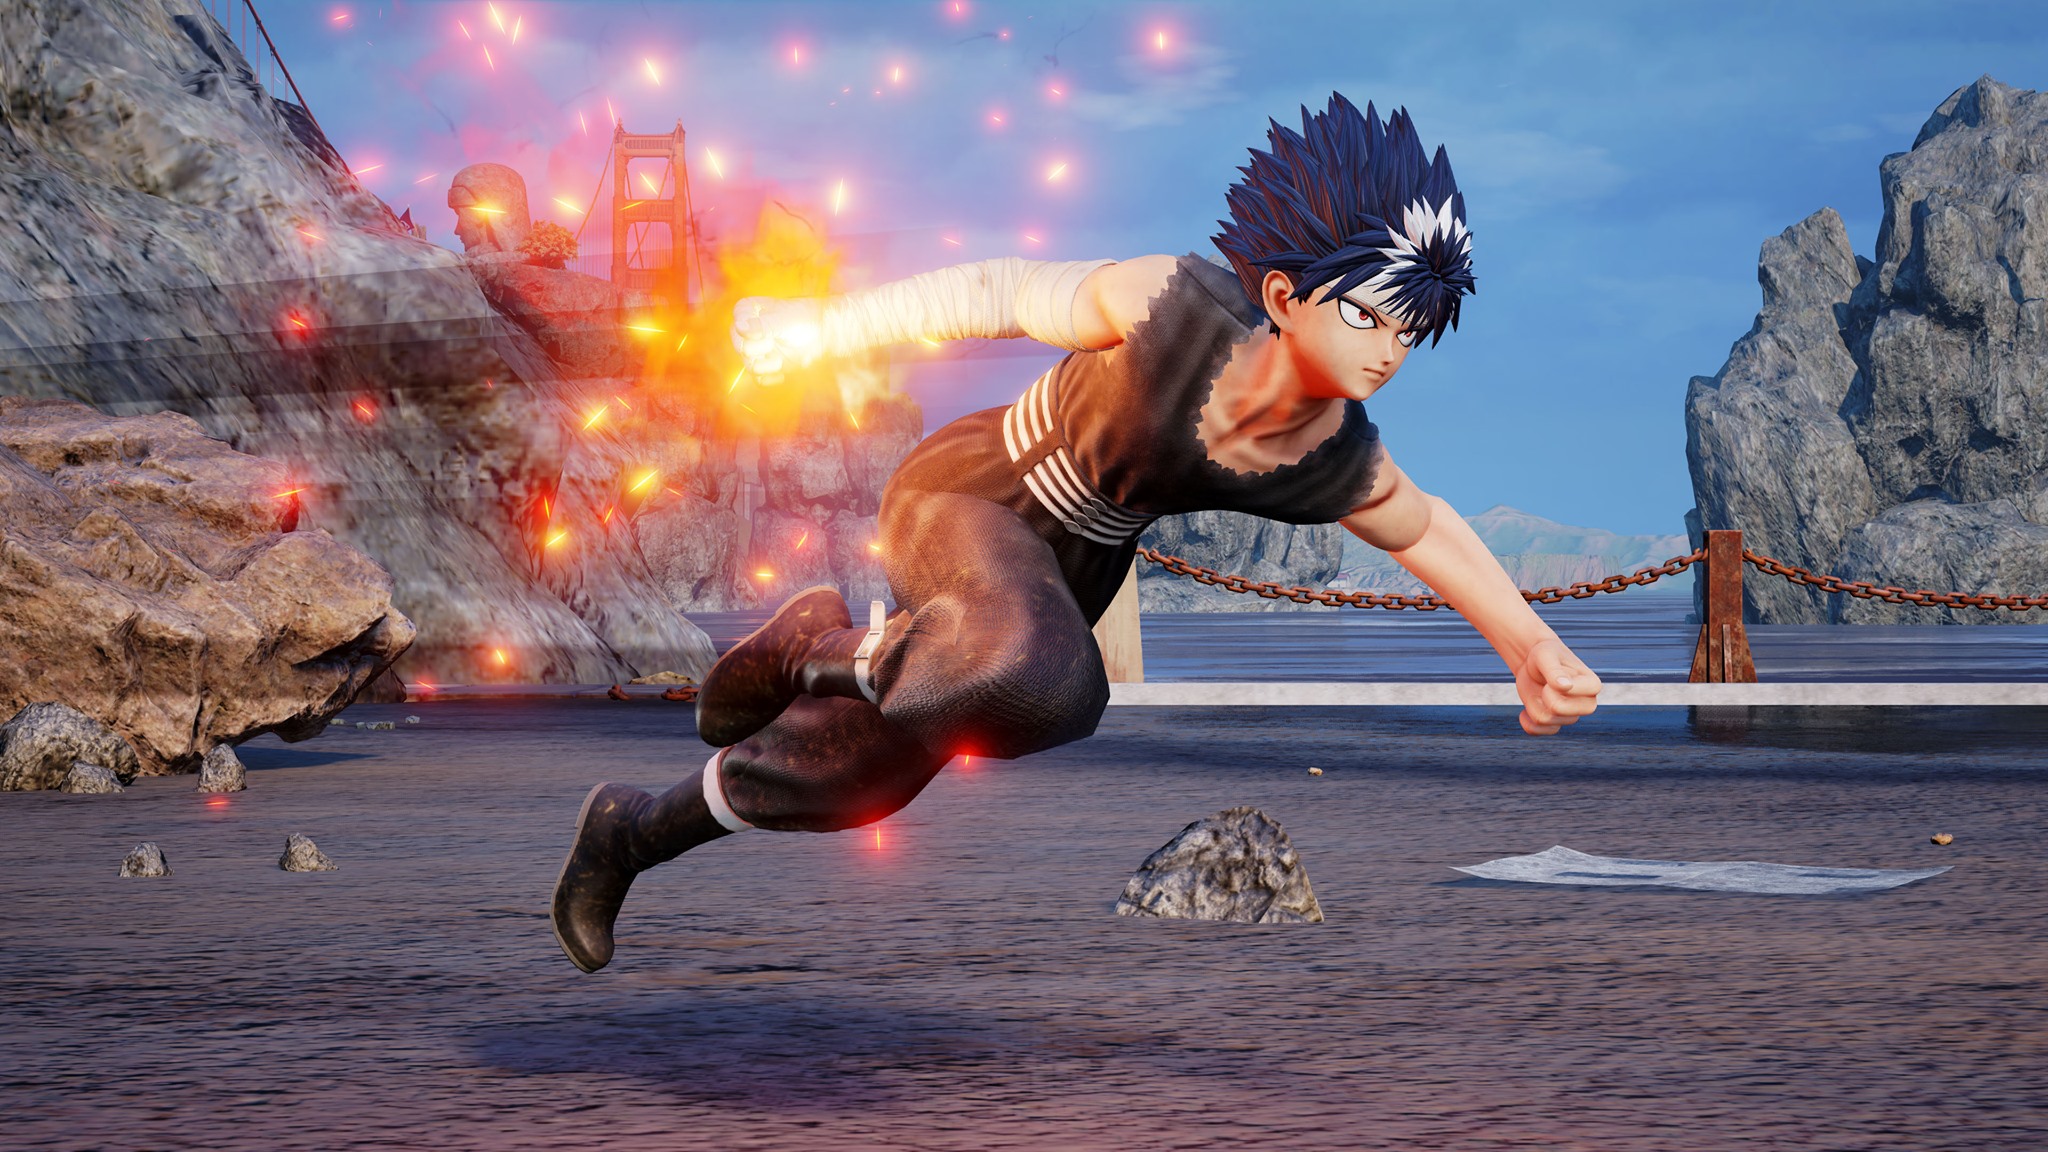 Jump Force Adding Dlc Character Hiei In 2021 On Switch Nintendo Everything Jump force, the insane anime crossover fighting game that was first revealed at e3 last year, is set to launch next friday, february 15 following a series of beta tests. jump force adding dlc character hiei in